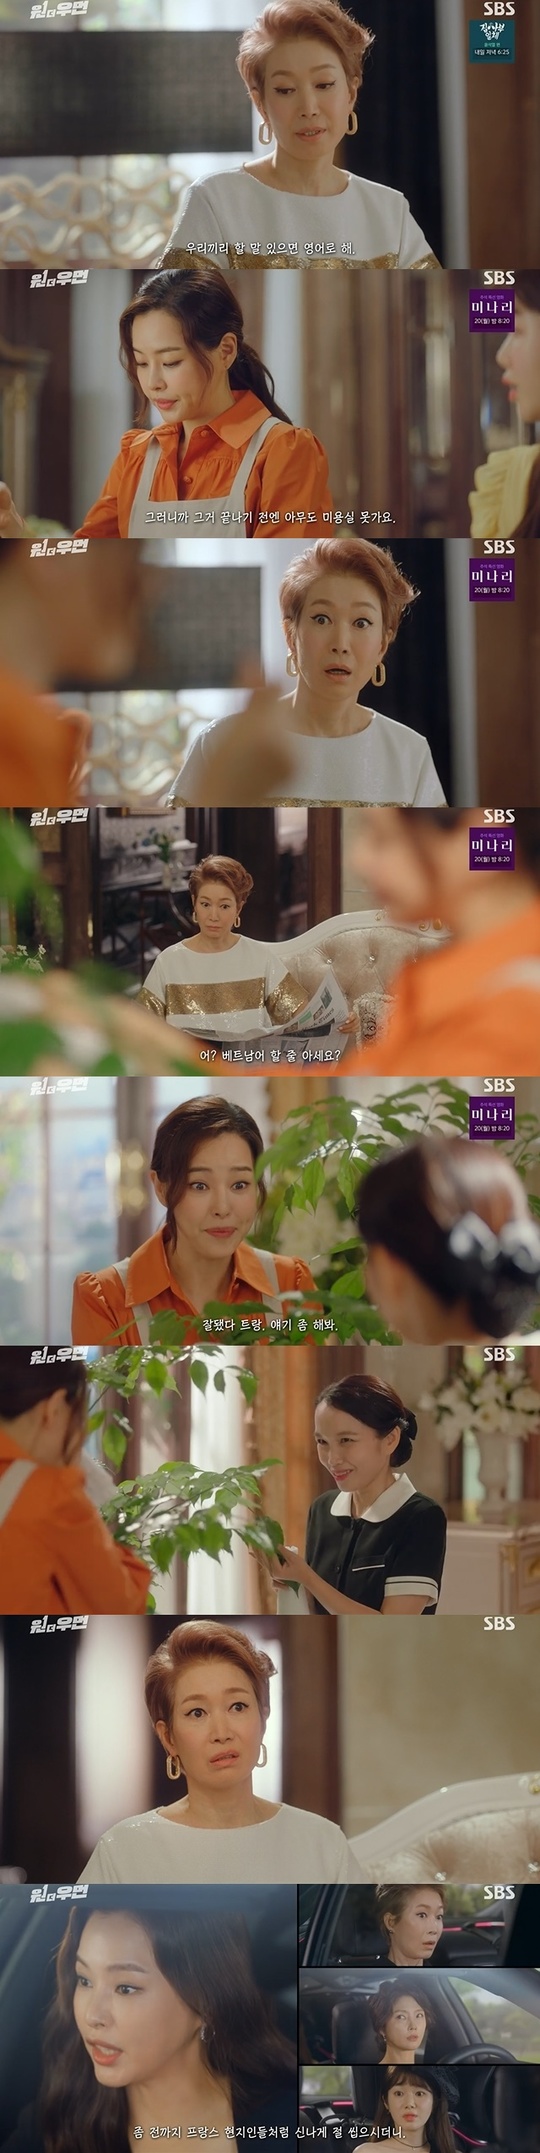 Lee Ha-nui began to take advantage of the prosecutors ability to put Cider in full swing at the conglomerate Laws.In the second episode of SBS gilt drama one the woman (played by Kim Yoon and directed by Choi Young-hoon), which was broadcast on September 18, the figure of the prosecutors supporting actor (Lee Ha-nui) who loses his memory and lives the life of his chaebol daughter-in-law and heiress, Mina (Lee Ha-nui) was portrayed.The supporting actor, who opened his eyes on the day, was diagnosed with retrograde memory loss due to a head injury in a traffic accident, and he did not even recall that he was a prosecutor.In the end, Cho Yeon-ju lived her life instead of misunderstanding that she was the youngest daughter of Yuko Fueki group and daughter-in-law of Hanju group.Laws family only thought of playing such a supporting role as Lee Yong.In the morning, all the Yuko Fueki group families died and their daughter-in-law became the only heiress, and the supporting actor Lee Yonghae tried to take over the property of Yuko Fueki group.So they wanted to keep the supporting actor under their protection.After that, the supporting actor was discharged from the hospital and started to marry in a week, but the supporting actor was 180 degrees different from the river that endured everything.Cho Yeon-ju was rebelling during the period while digesting unreasonable housework.In particular, Cho played a Rear Talk phone with English language and shared a insidious plan by avoiding him by Seo-won (Na Young-hee), his brother-in-law, Jae Hee (Jo Yeon-hee), and his youngest sister-in-law, Han Sung-mi (Song Seung-ha).Hee was surprised to say, Is not it domestic and east? And Cho said, How do you know whether I am domestic or overseas?But the English language comes in. Cho Yeon-ju was fluent in French, even Vietnamese as well as English language.The supporting actor had a Laws Rear talk phone while talking in Vietnamese in front of the only Vietnamese Maid Trang (Hung Bun) and Shimo signatories left in the week.The signatories who became the position of the station were just saying, Why are you bullying people? There are things that are not like that?This supporting actor also exploded completely.The memorial service of Yuko Fueki, which was held by Hanju, was held by the Laws family, except for themselves, saying, I will make it a lunatic, and I will make it a mental sick person.Its only until he gets Yuko Fuekis property anyway. What about the kid who lost all his parents brothers?Who cares what happens when he lives in my house? Cho Yeon-ju, who saw what happened to the Laws, which was worse than he thought, did not put up with it.The supporting actor completely turned the scene of the worship ceremony with the opportunity when Han Sun-woo (Shin Seo-woo), the son of Huh Hee, threw a snack on his head during the worship ceremony.Meanwhile, Han Seung-wook (Lee Sang-yoon), a former married man of Kang Mina who was pushed out of the succession plan of the Hanju group, noticed the only award of supporting actor.Han Seung-wook, who had earlier witnessed Yuko Fueki eating peanuts, which his supporting actor had been allergic to, asked his assistant, Roh Hak-tae (Kim Chang-wan), to give him a medical record of Kang Mina, and confirmed that Kang Mina did not receive scar removal surgery after marriage.